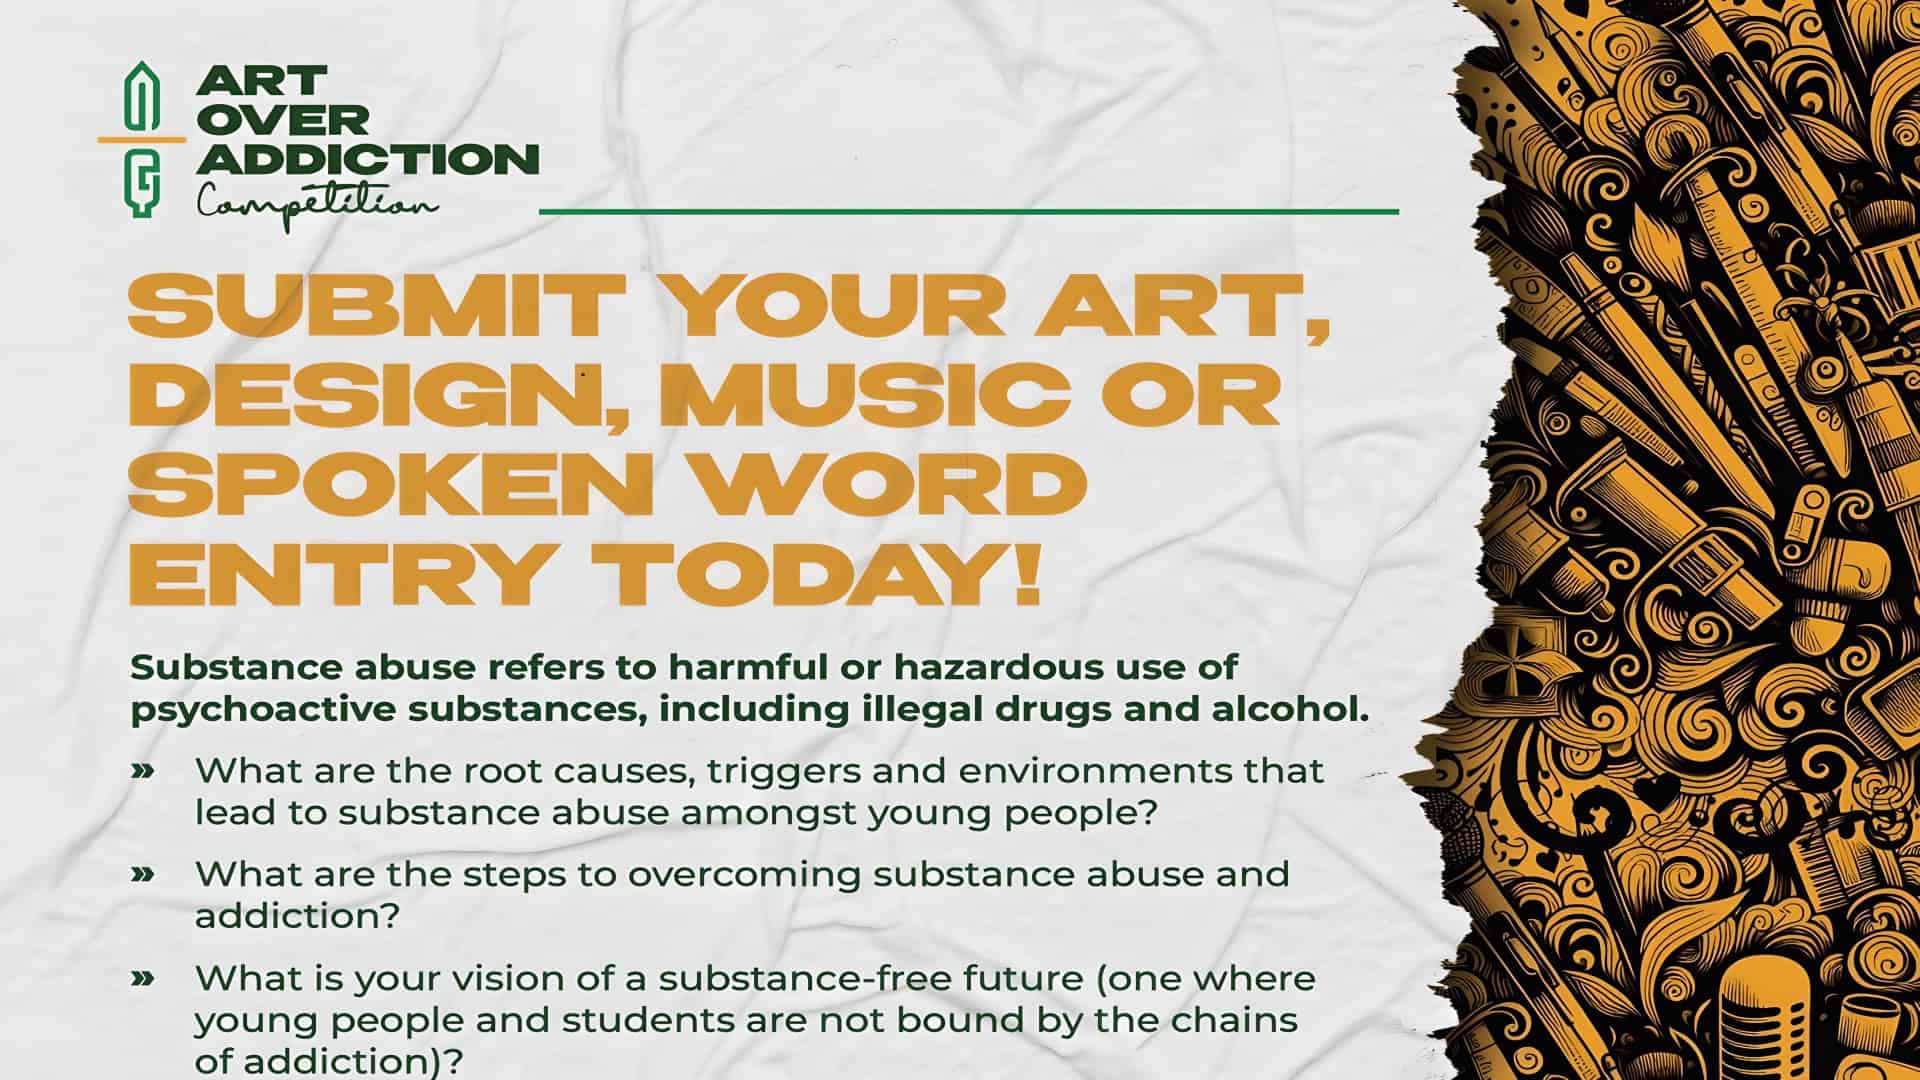 Art Over Addiction Competition